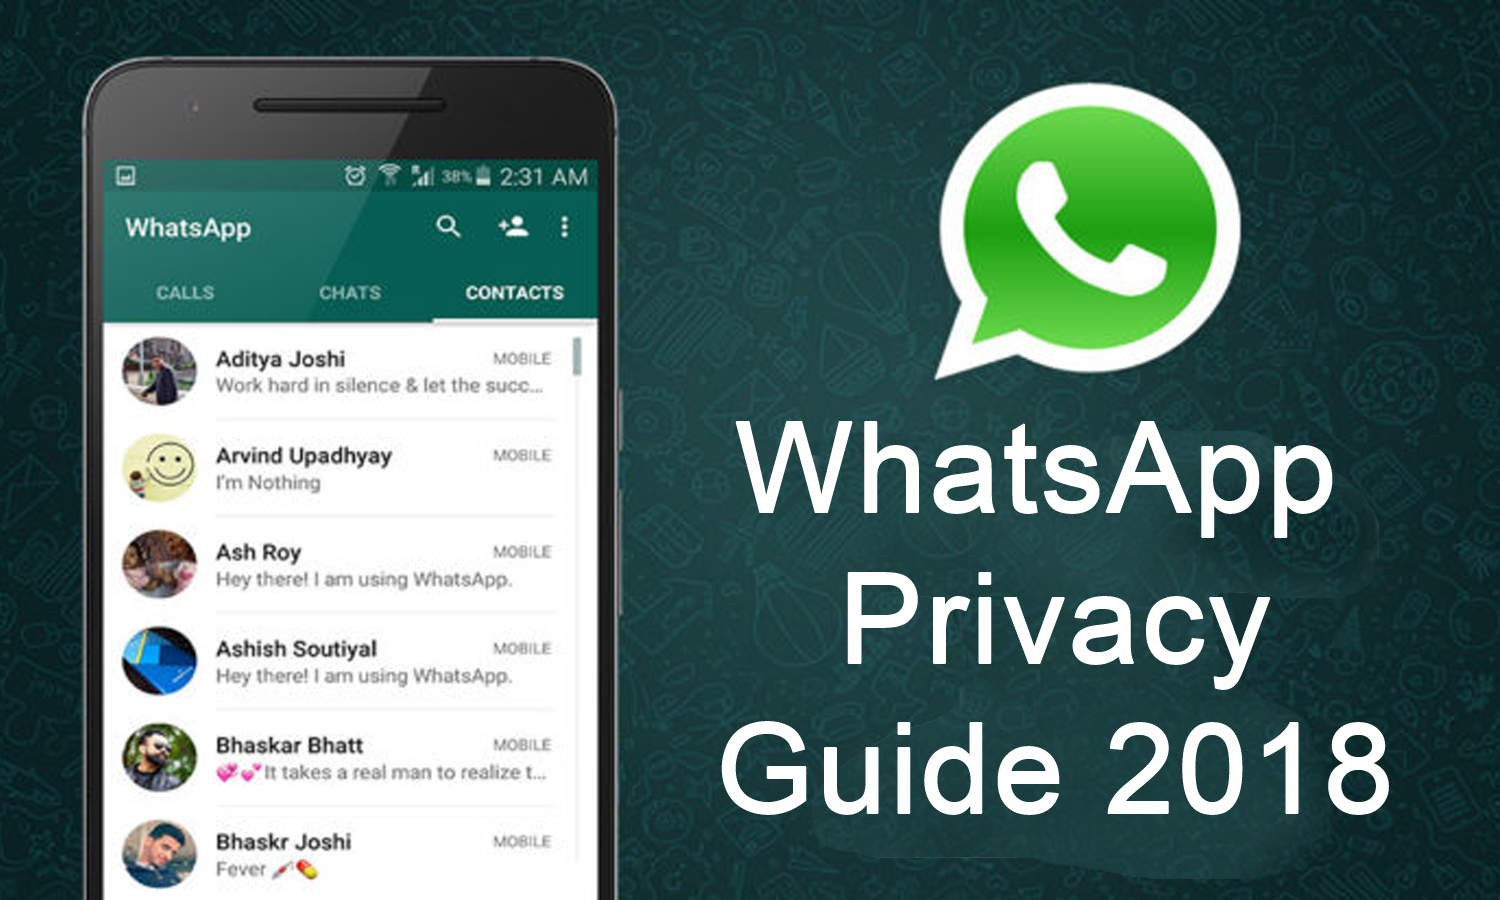 The image shows a screenshot of the WhatsApp app with the 'Privacy Guide 2018' text overlaid.